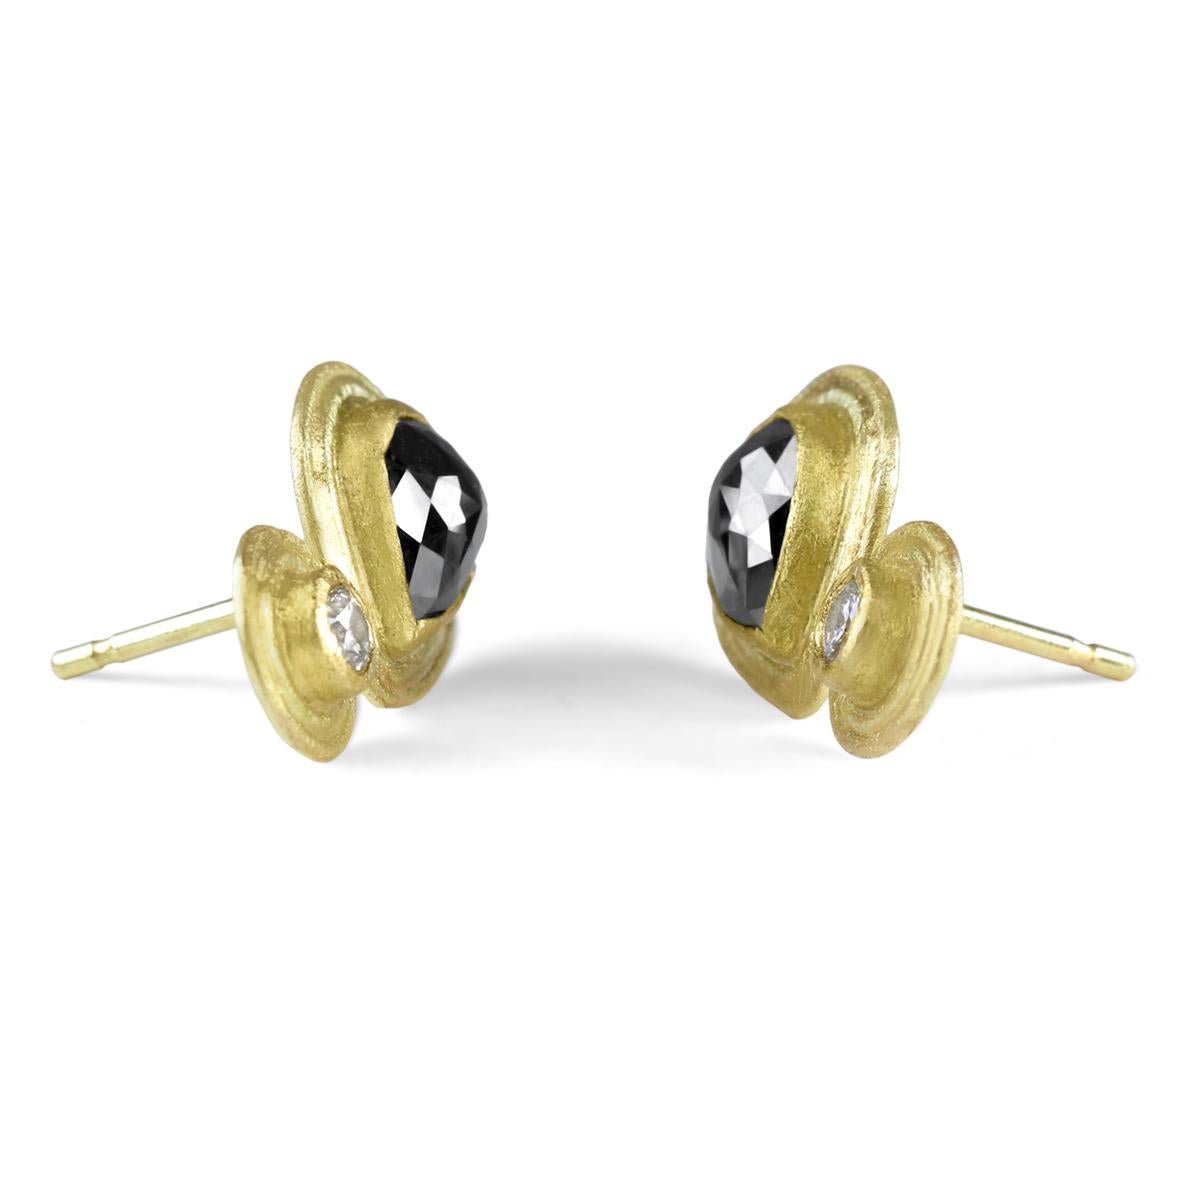 One of a Kind Double Stone Stud Earrings hand-fabricated by jewelry artist Petra Class featuring two rose-cut black diamonds and two 3mm round brilliant-cut white diamonds individually set in the makers signature 22k yellow gold double framed